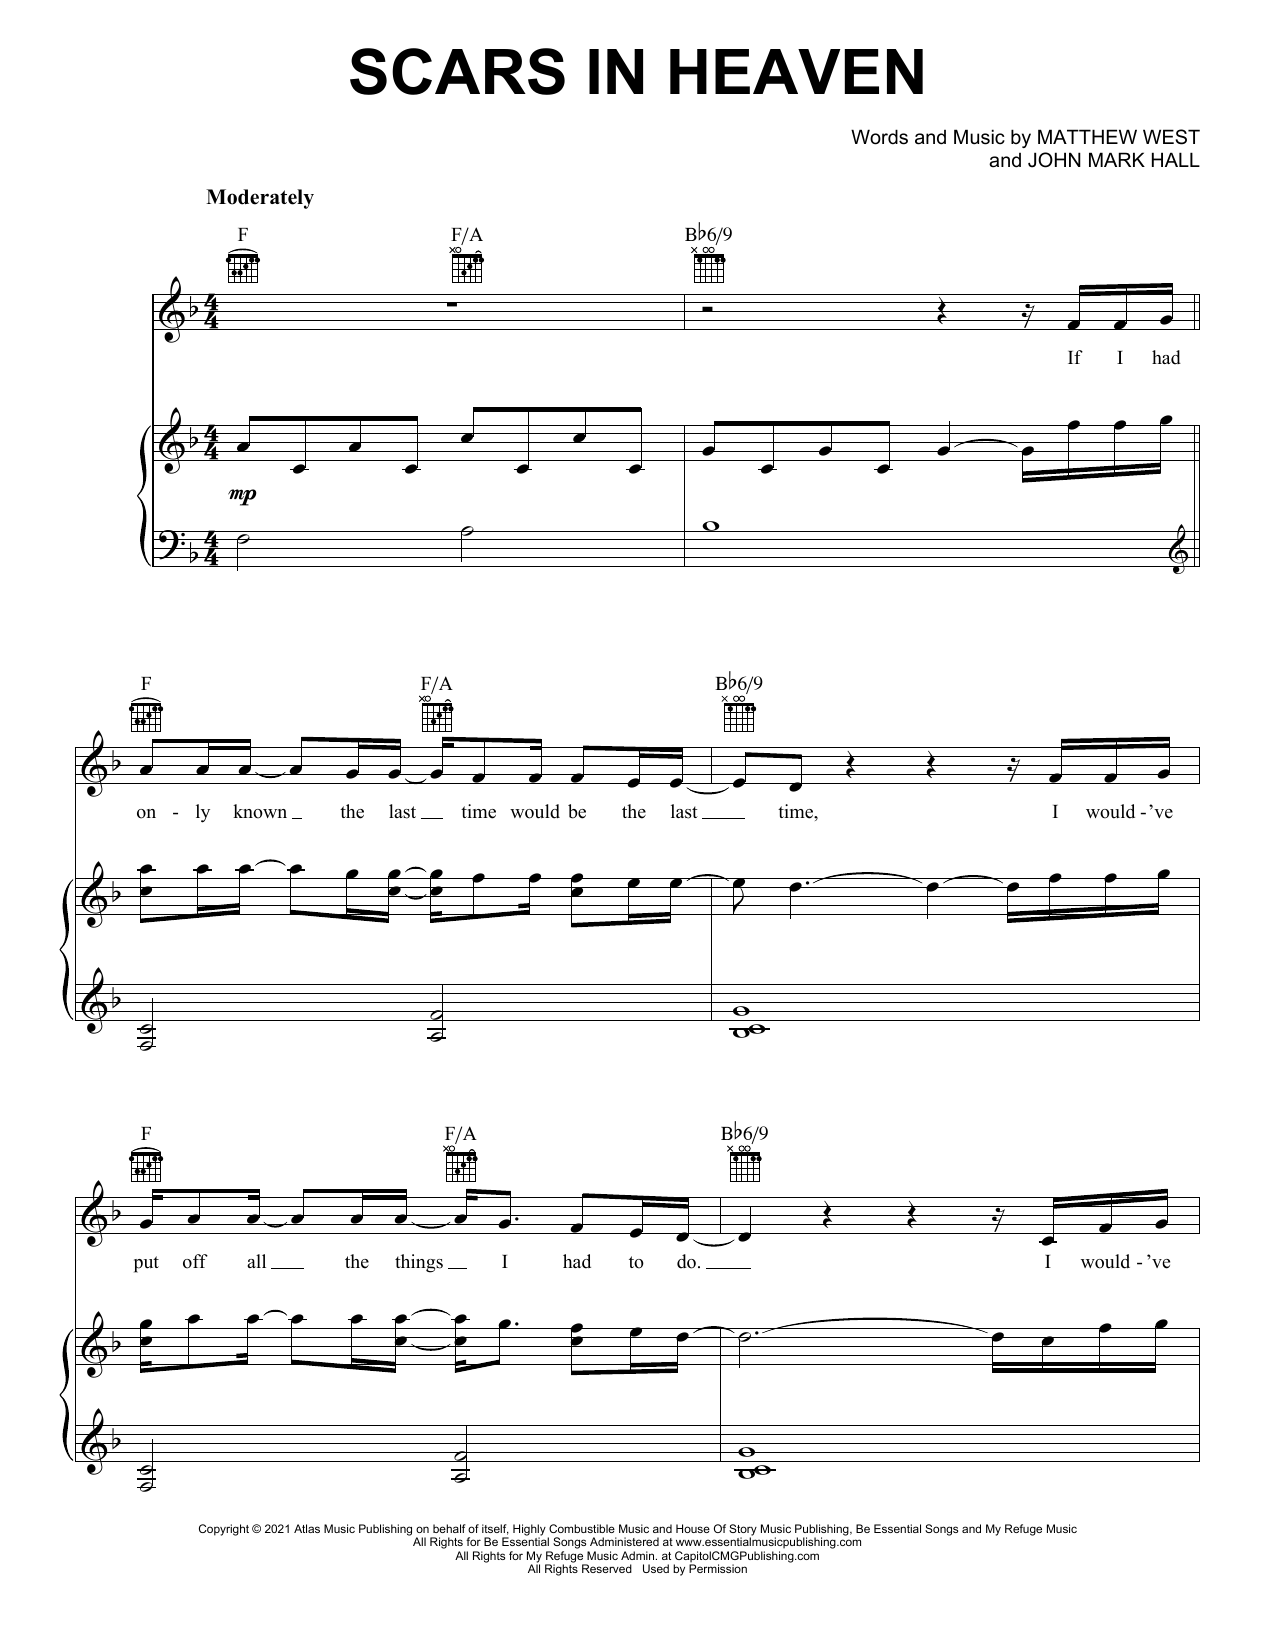 Casting Crowns "Scars In Heaven" Sheet Music Download Printable PDF